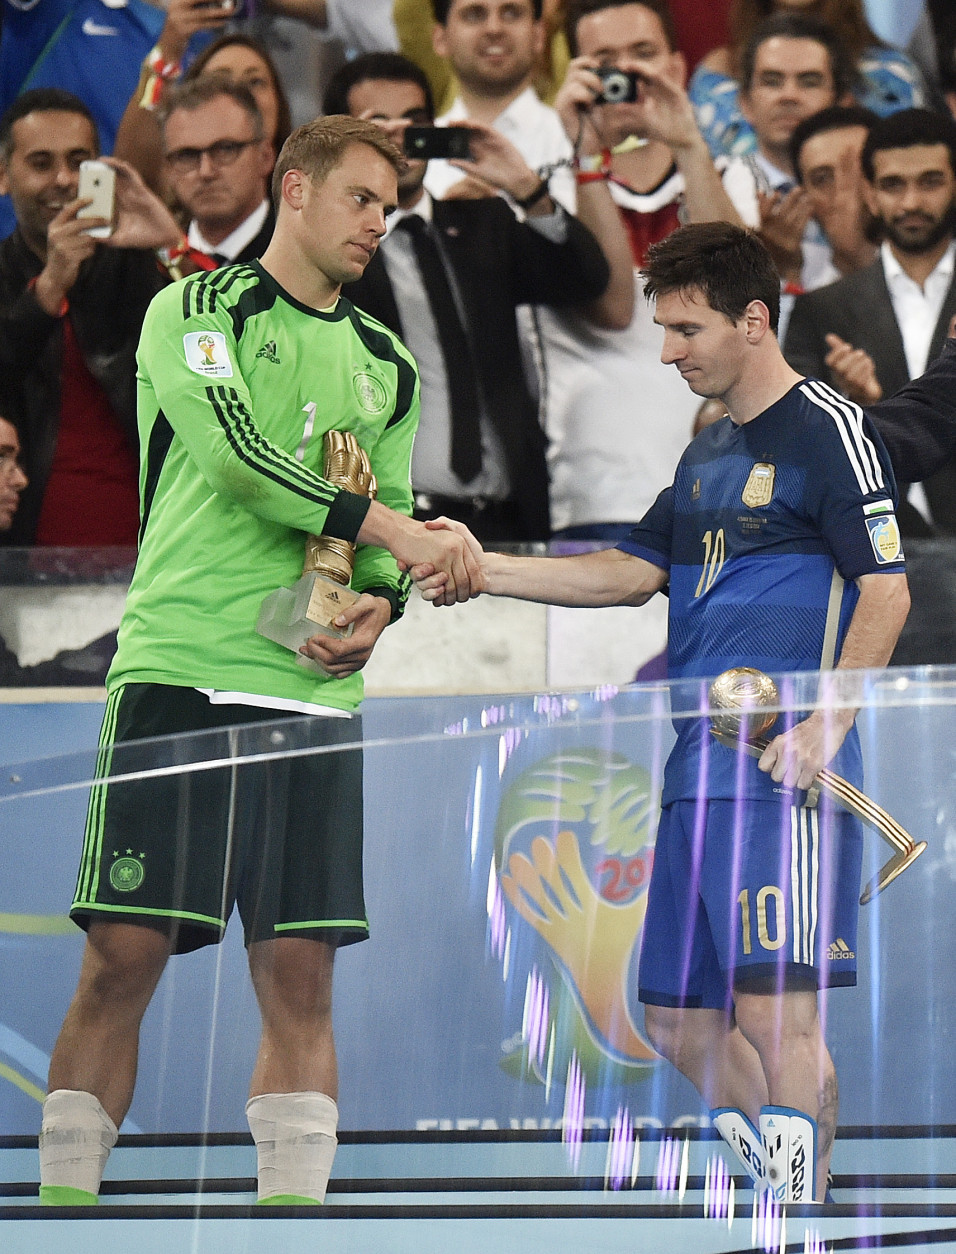 FOR USE AS DESIRED, YEAR END PHOTOS - FILE - Germany's goalkeeper Manuel Neuer, left, winner of the Golden Glove award for best goalkeeper, shakes hands with Argentina's Lionel Messi, winner of the Golden Ball award as the tournament's top player, after the World Cup final soccer match between Germany and Argentina at the Maracana Stadium in Rio de Janeiro, Brazil, Sunday, July 13, 2014. Germany won the match 1-0. (AP Photo/Martin Meissner, File)